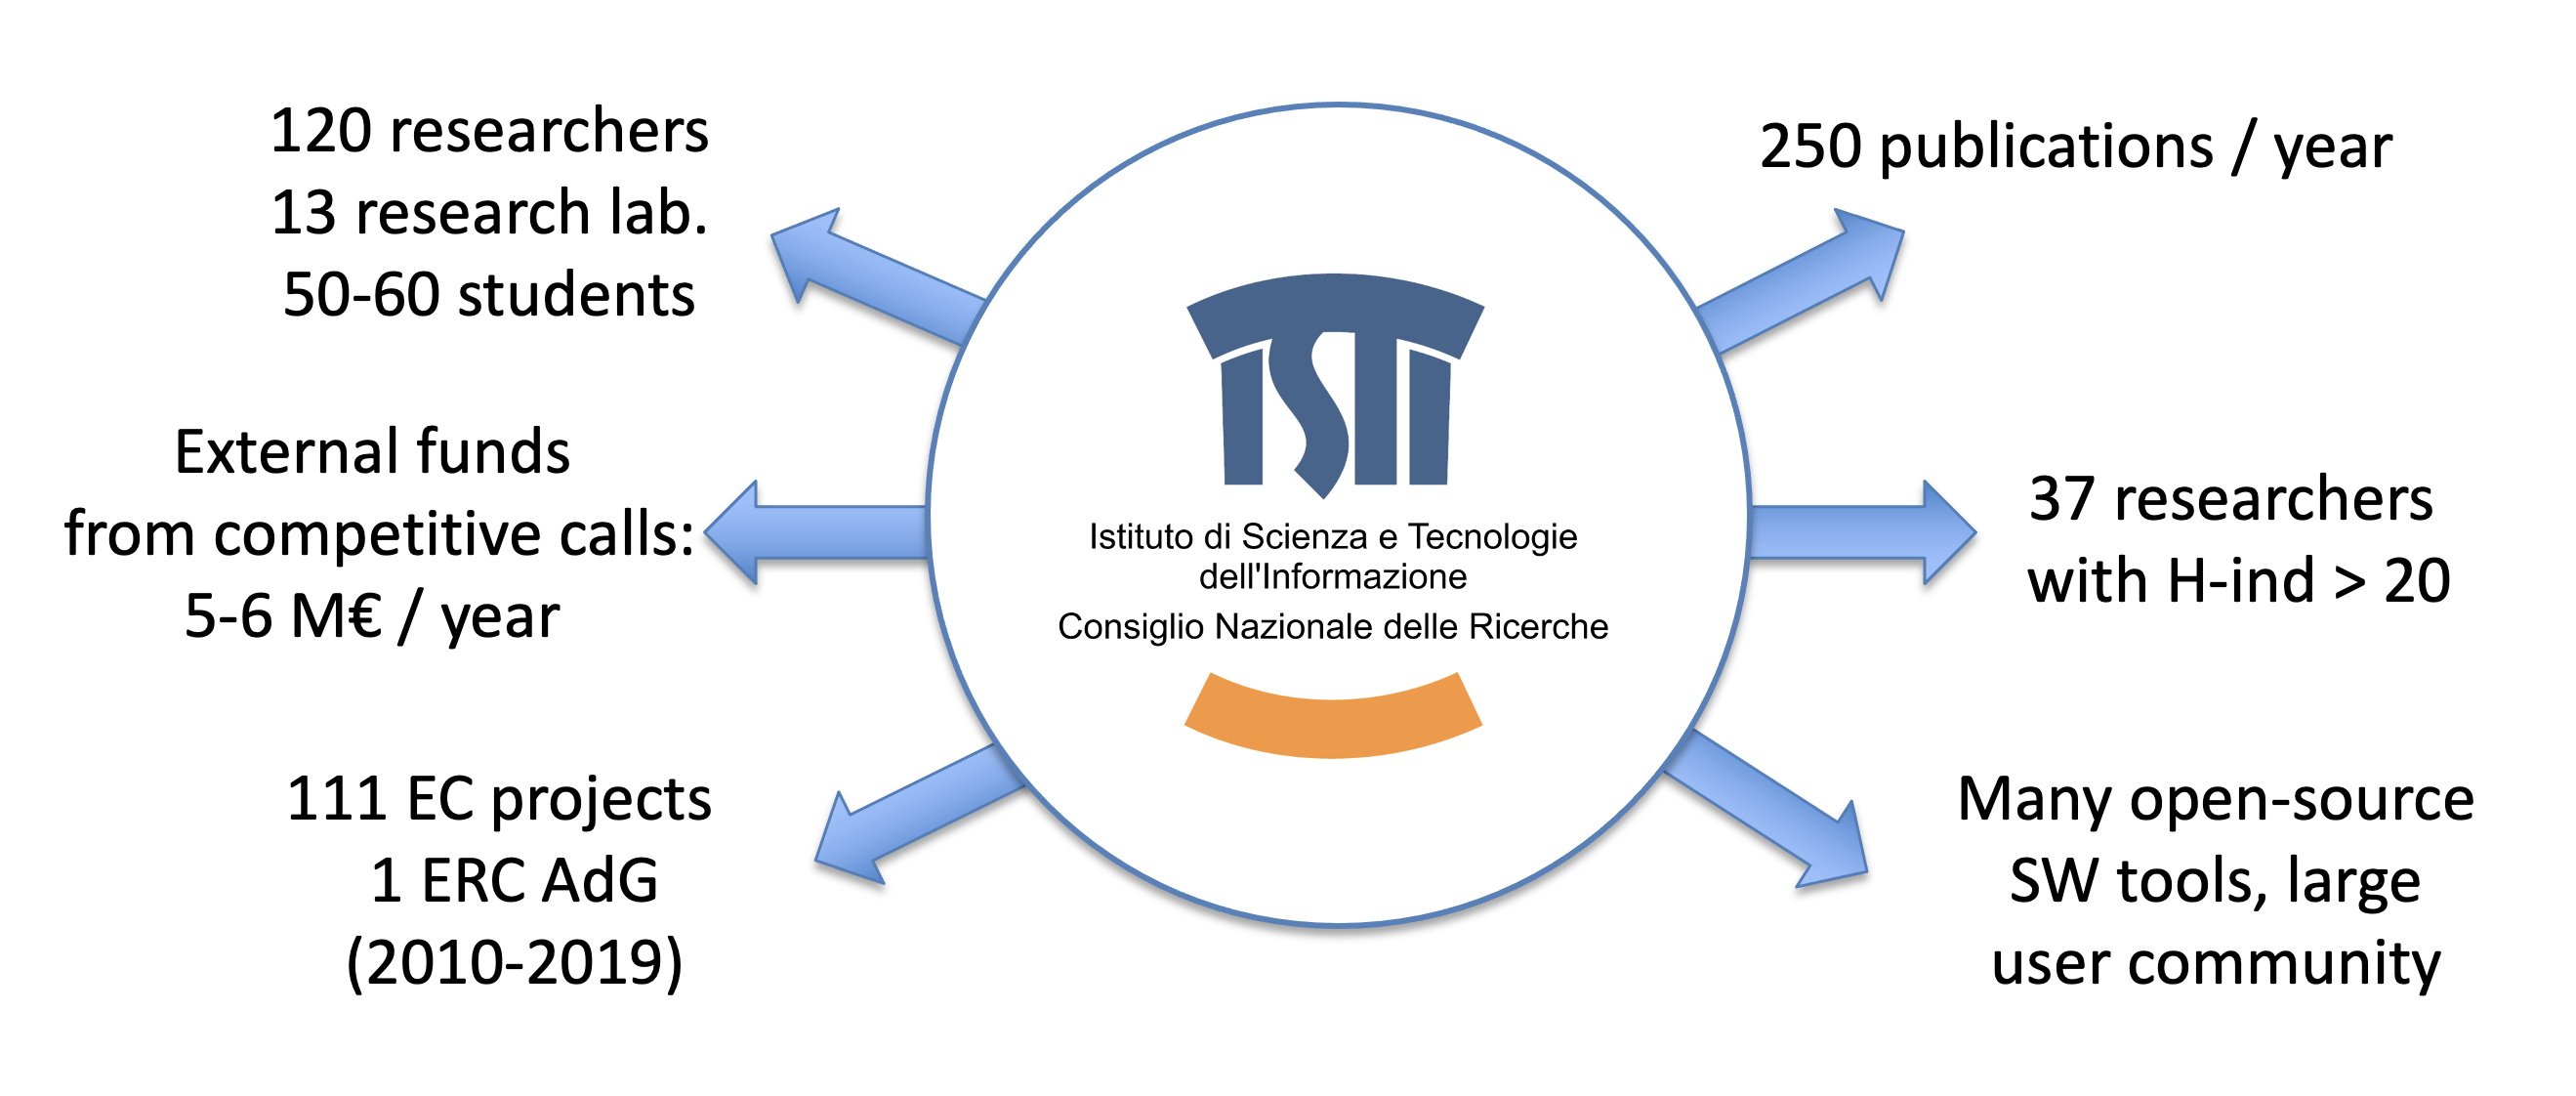 120 researchers, 12 research laboratories, 50-60 students, 111 EC projects, 1 ERC AdG, 250 pubblications per year, 37 researchers with H-ind higher than 20, many open source software tools, used by a large community